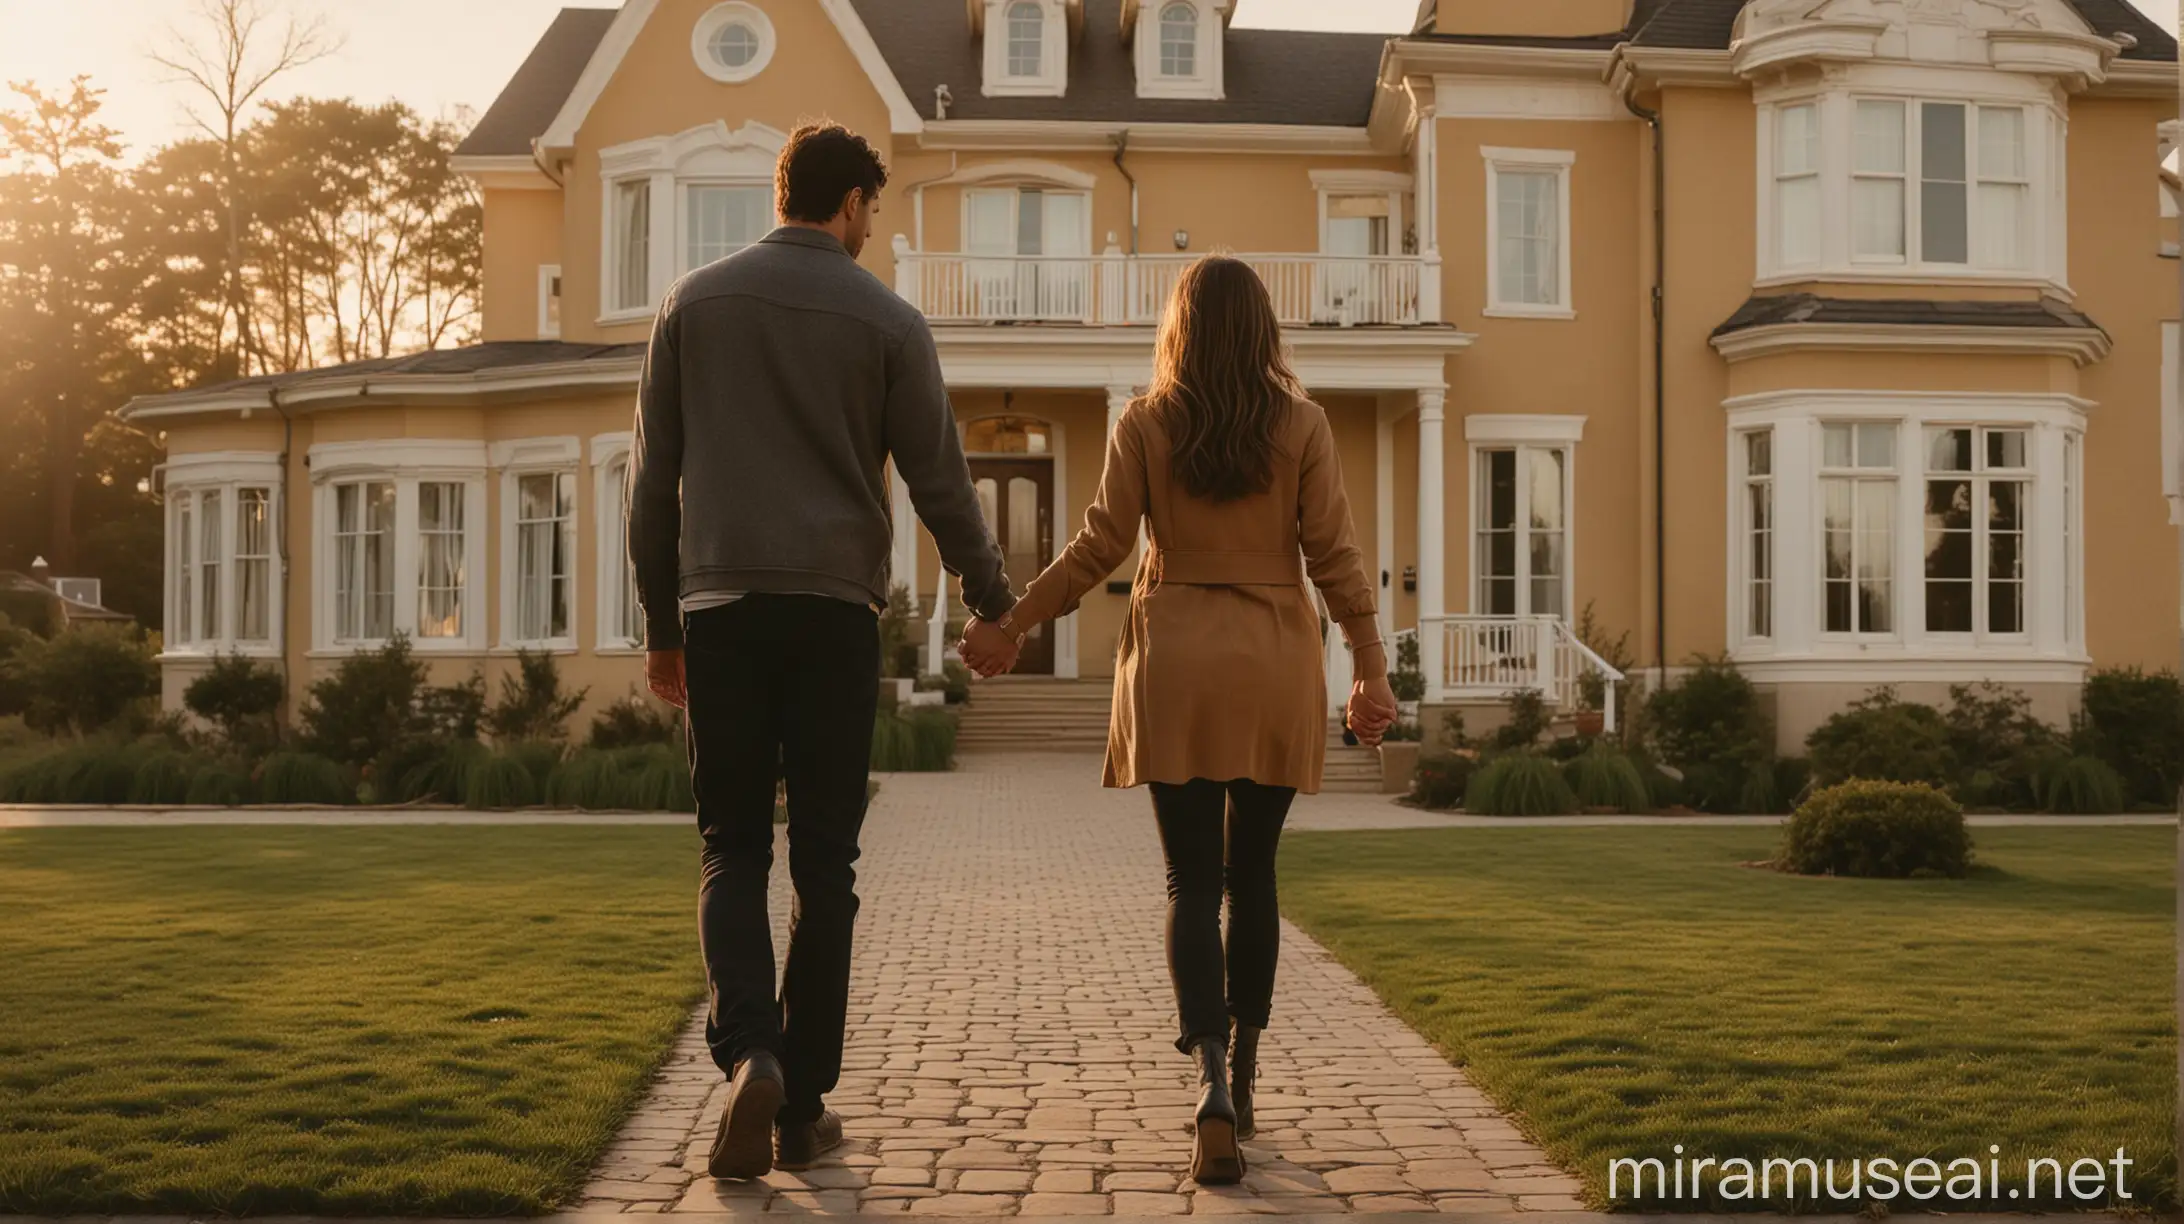 Romantic Couple Holding Hands in Front of Dream House at Golden Hour